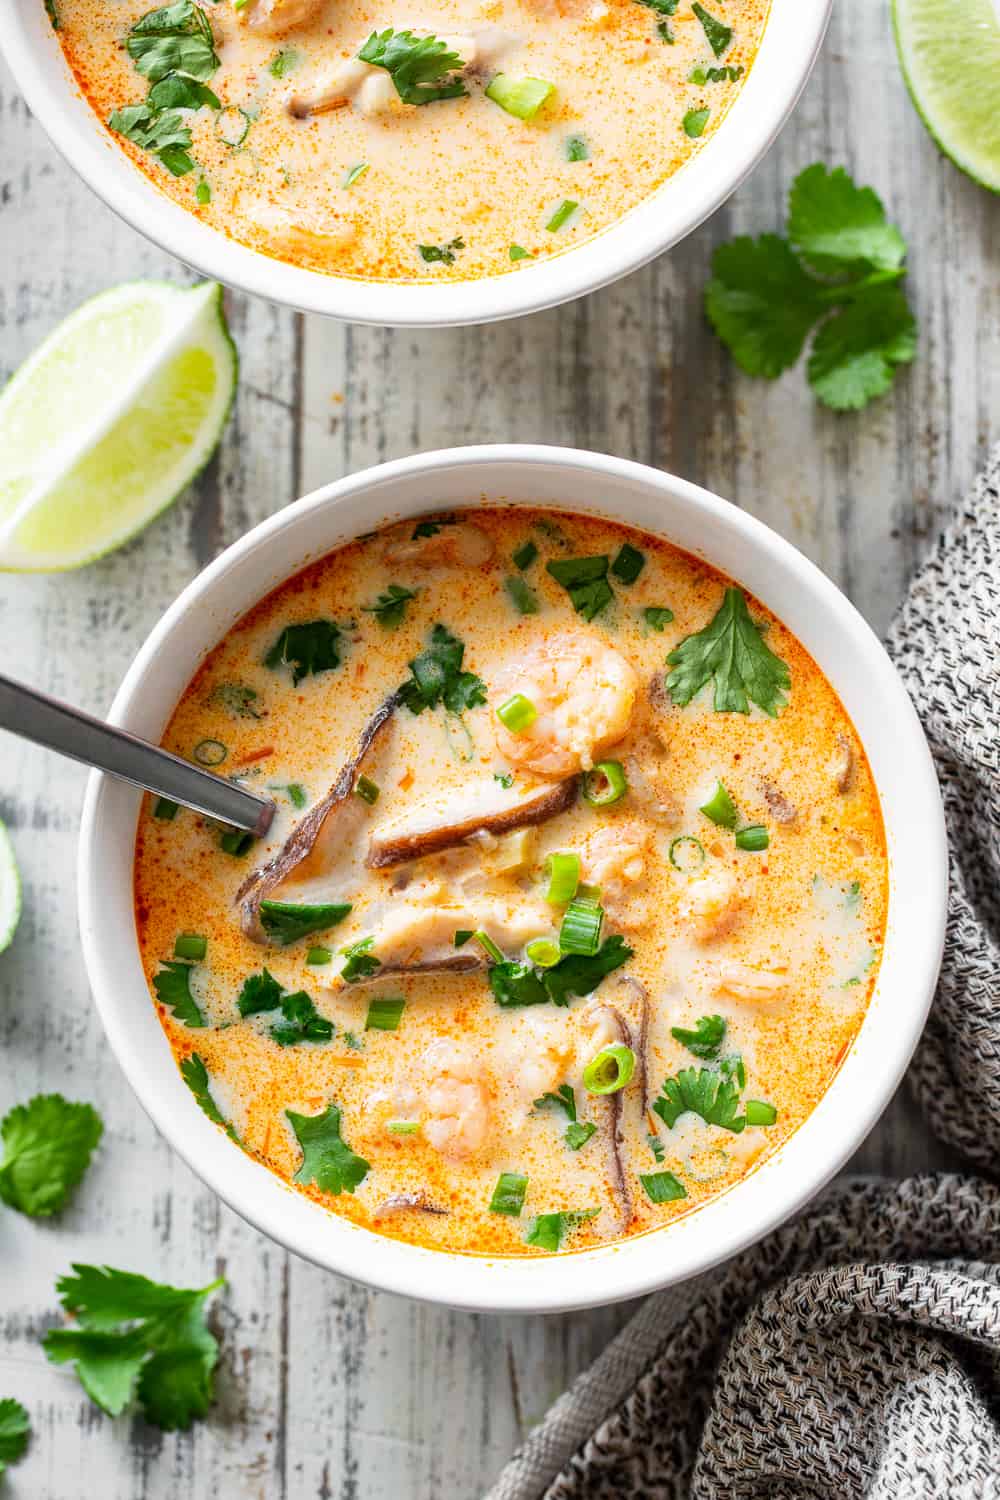 This Thai Shrimp Soup is quick and easy to make and packed with flavor! This shrimp coconut curry soup has simple ingredients and is naturally paleo, Whole30 compliant and low carb. It’s much healthier than takeout and ready faster! Amazing for a healthy weeknight dinner. #paleo #Whole30 #keto #lowcarb #cleaneating 